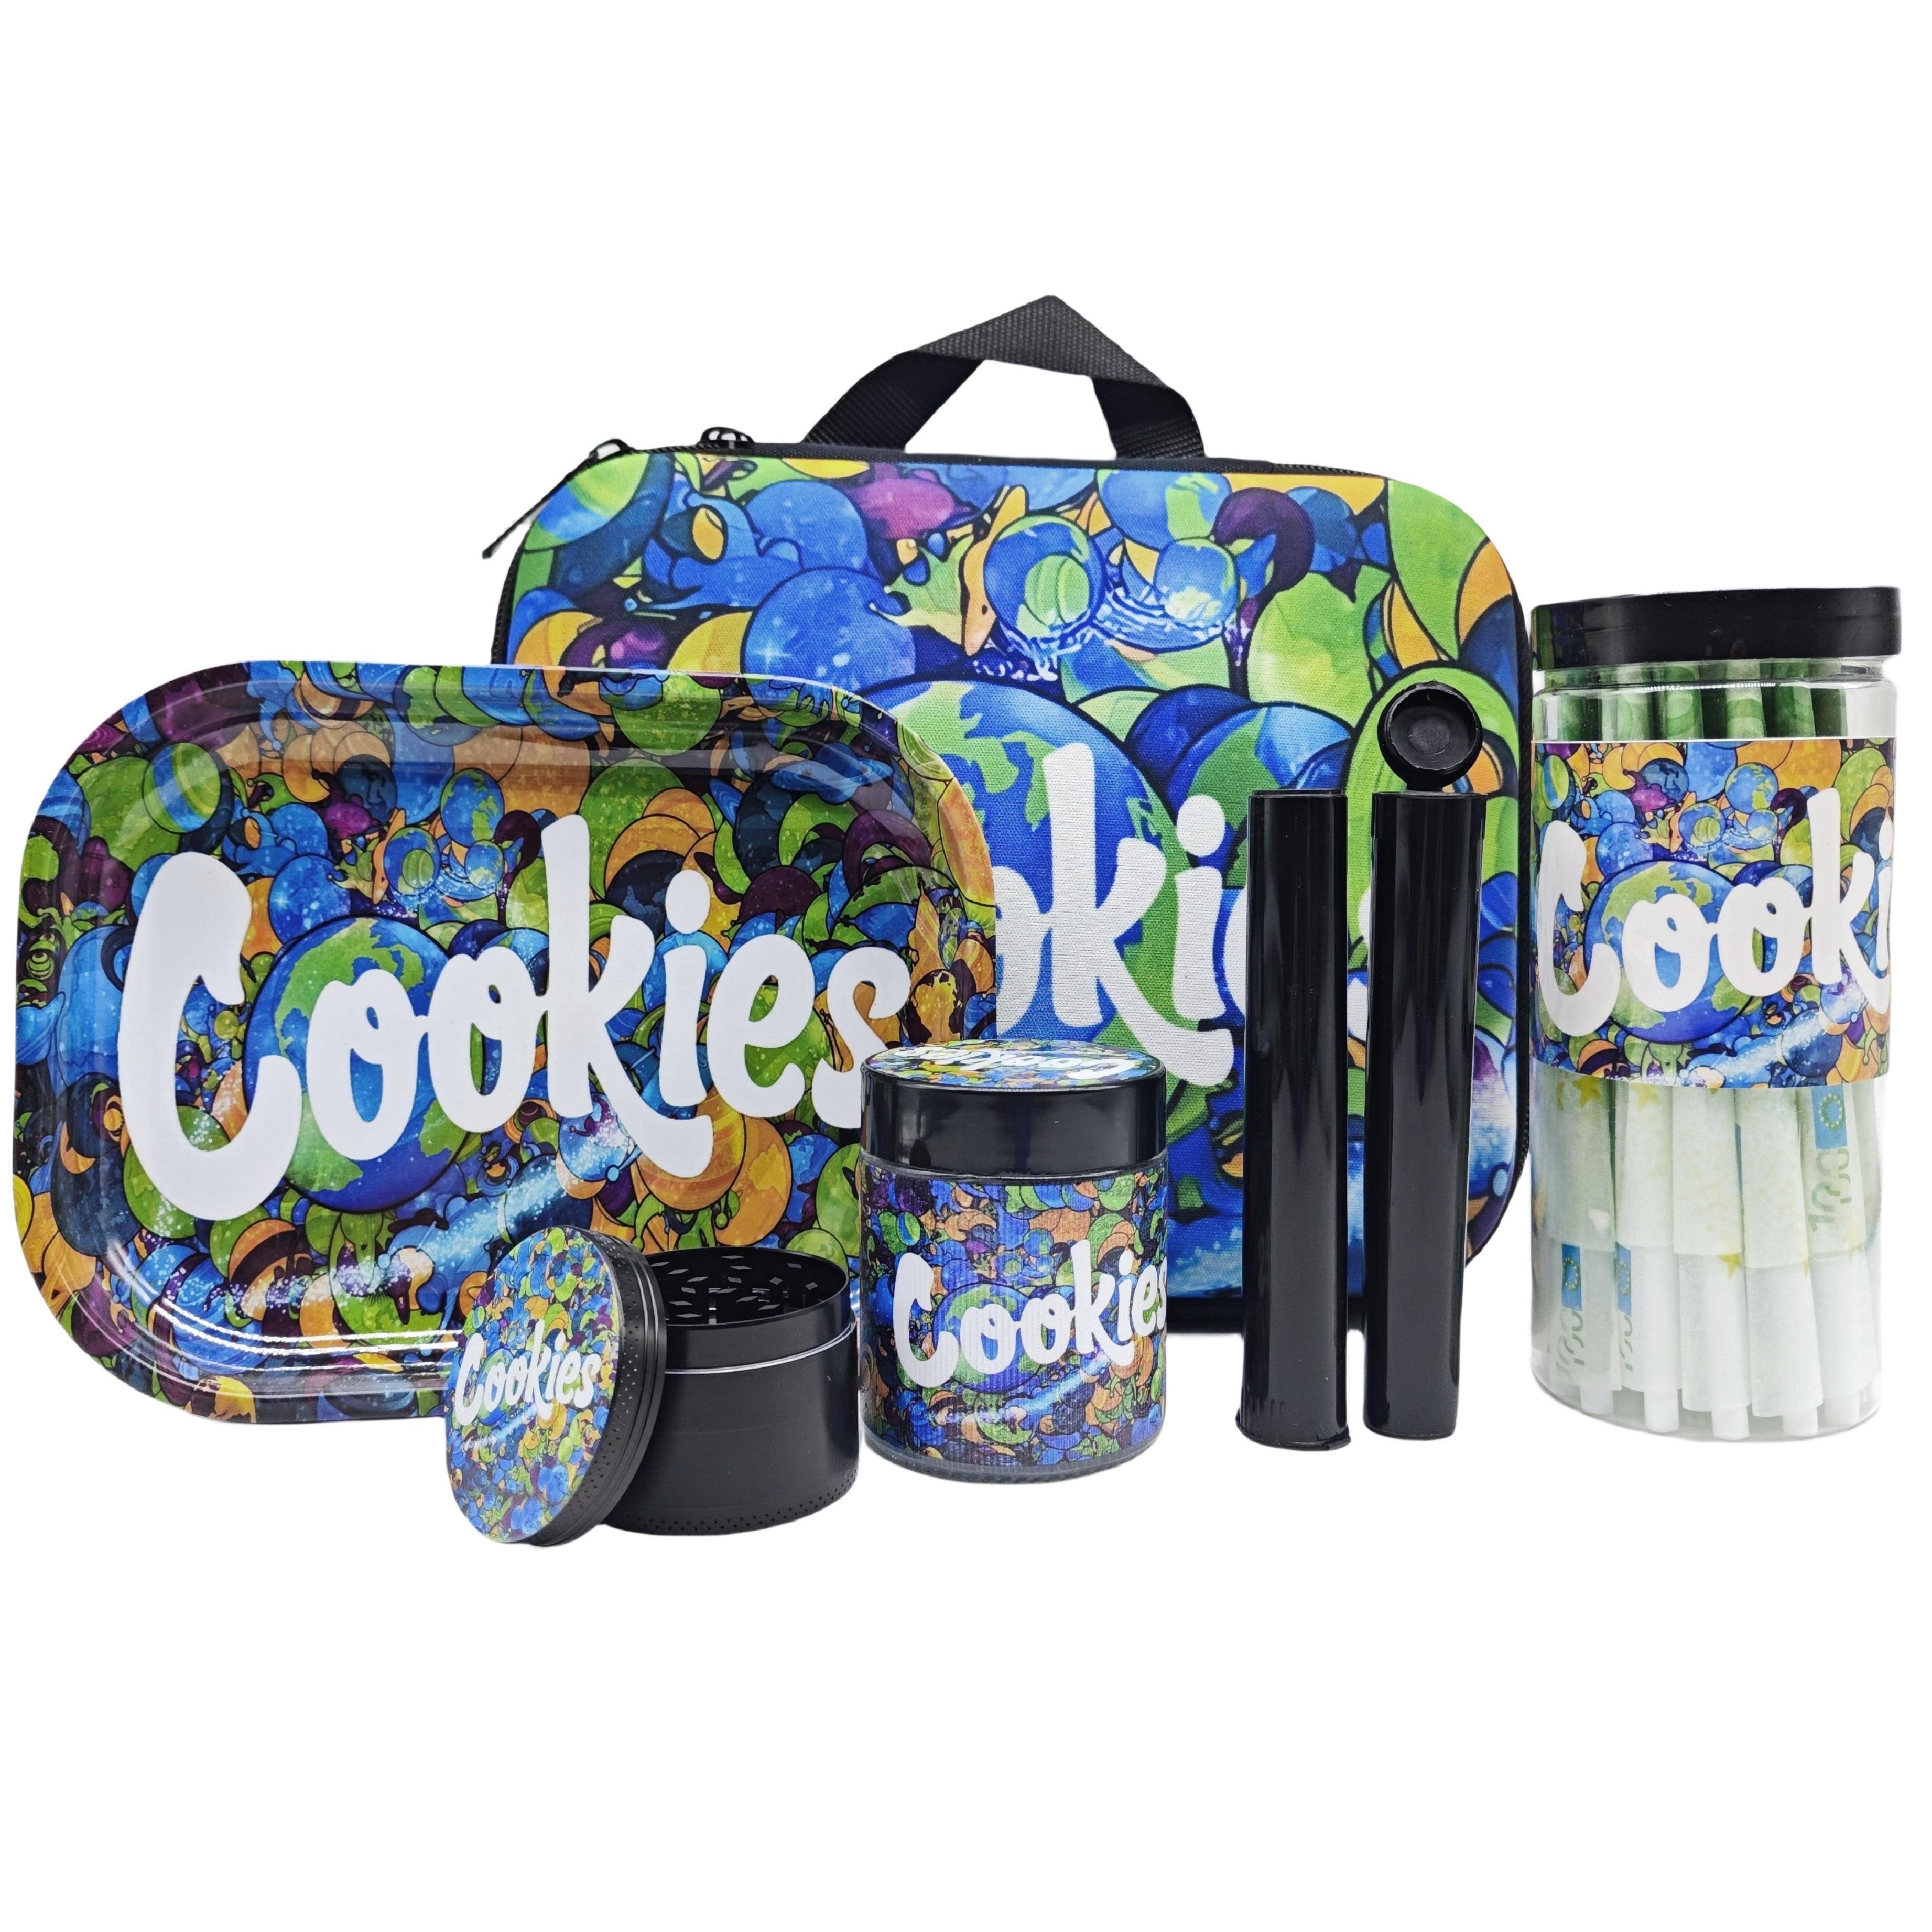 Cookies Rolling Tray Smoking Set - Smell Proof Stuff